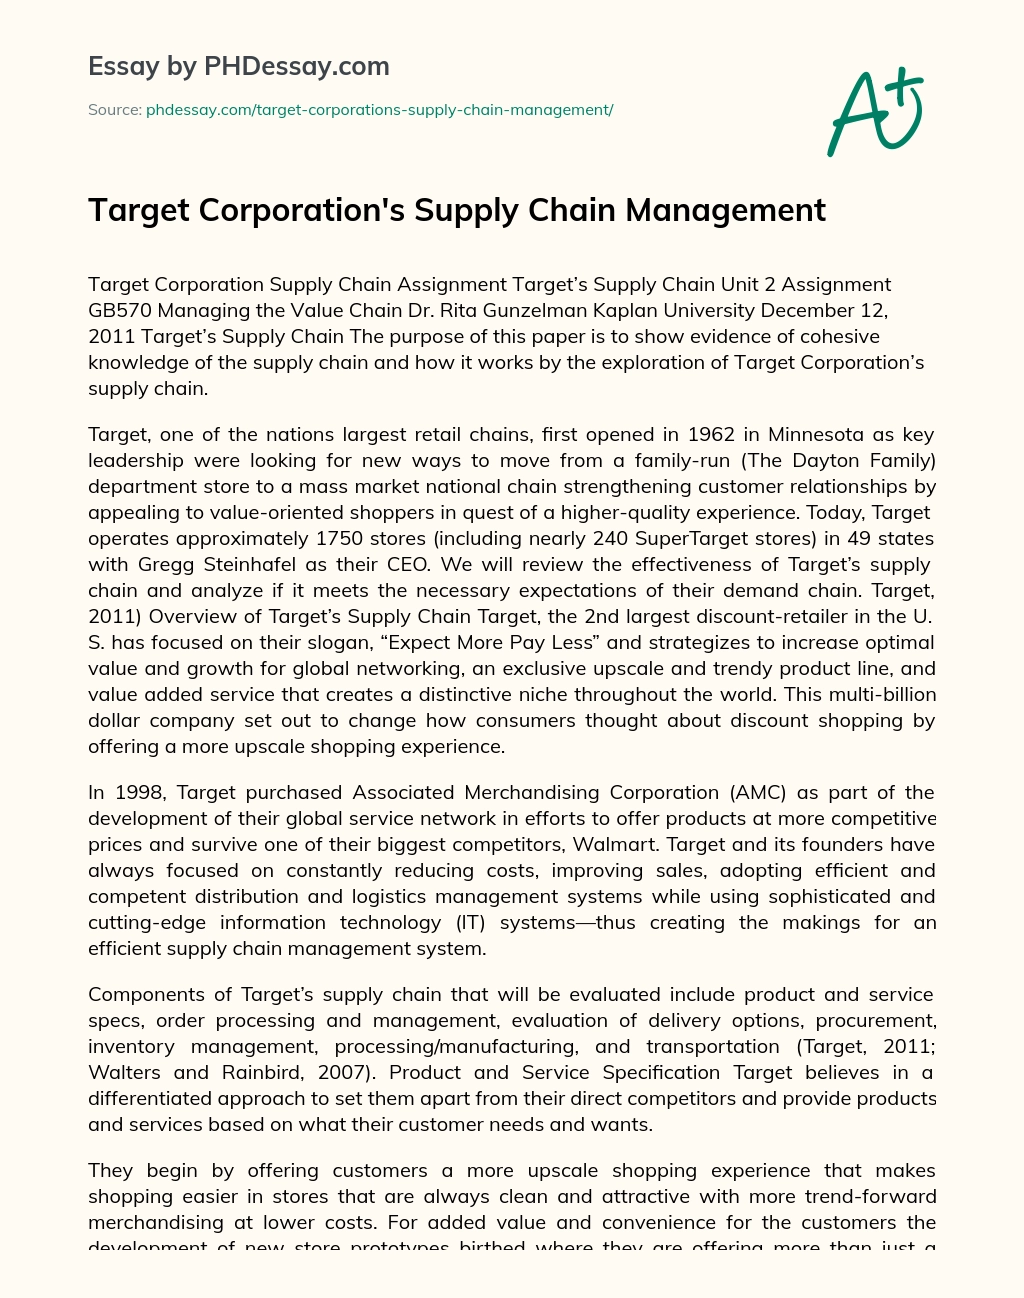 Target Corporation’s Supply Chain Management essay